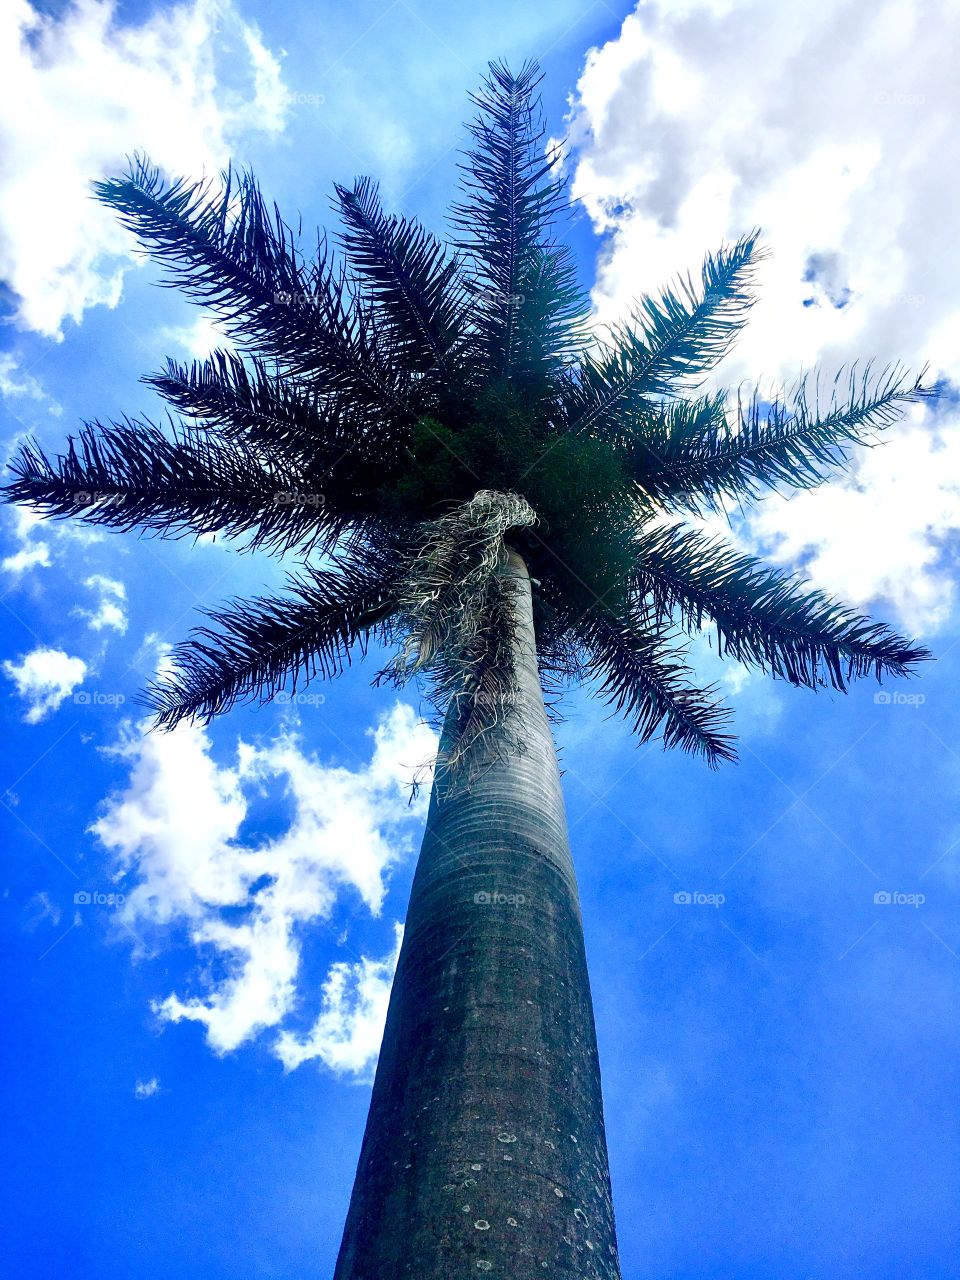 Palm tree and blue skies 